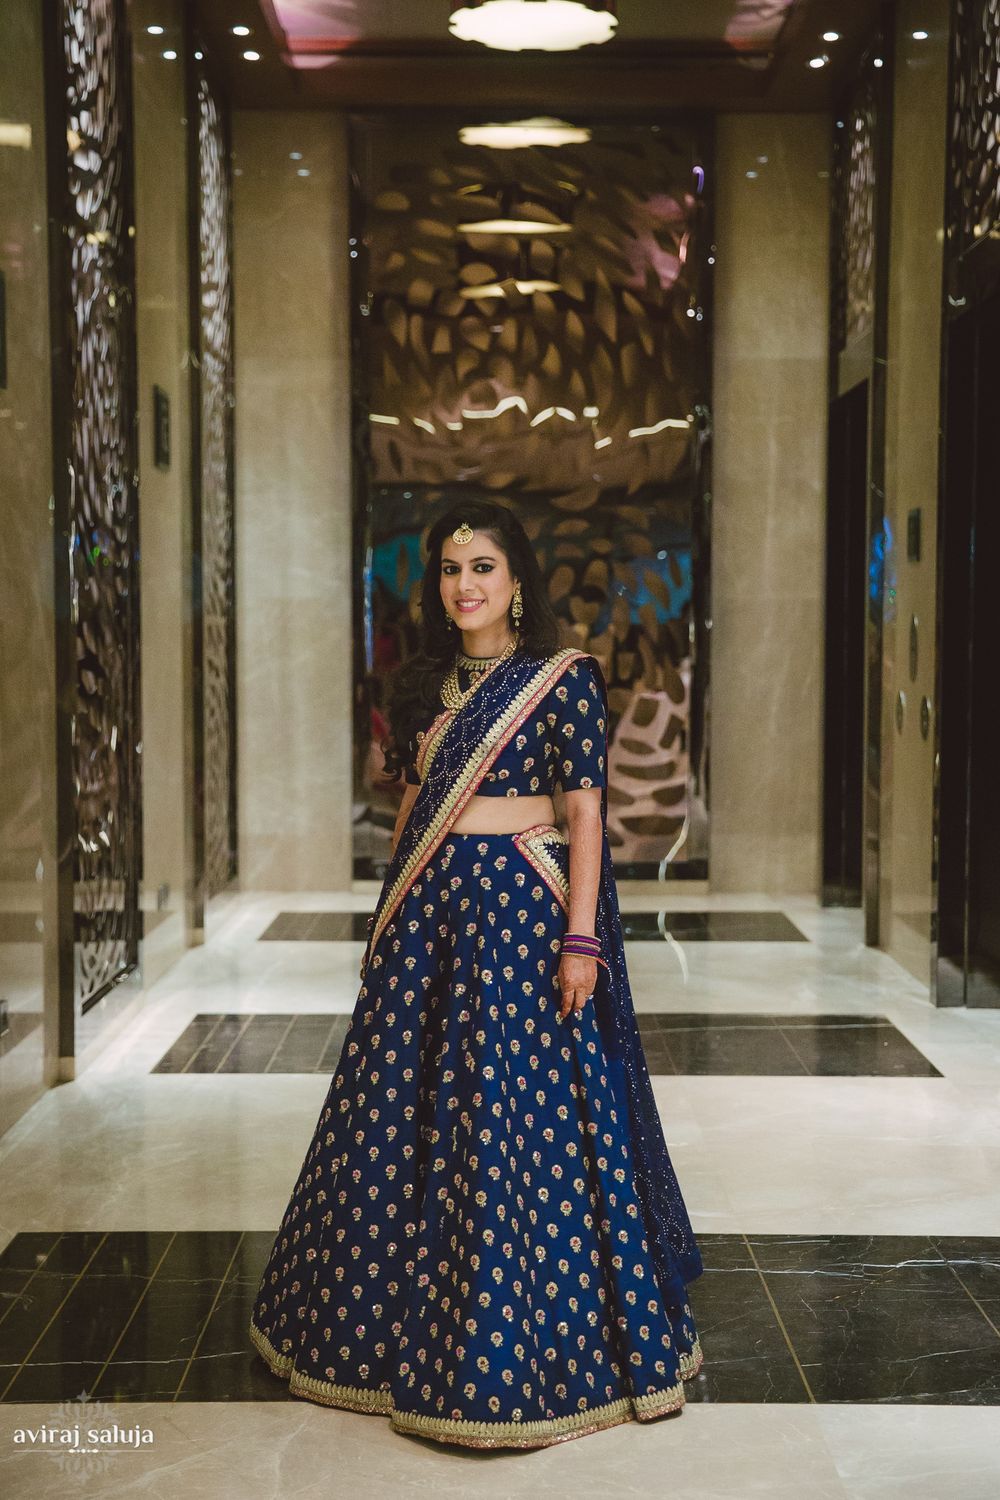 Photo of Navy blue lehenga with gold motifs and border